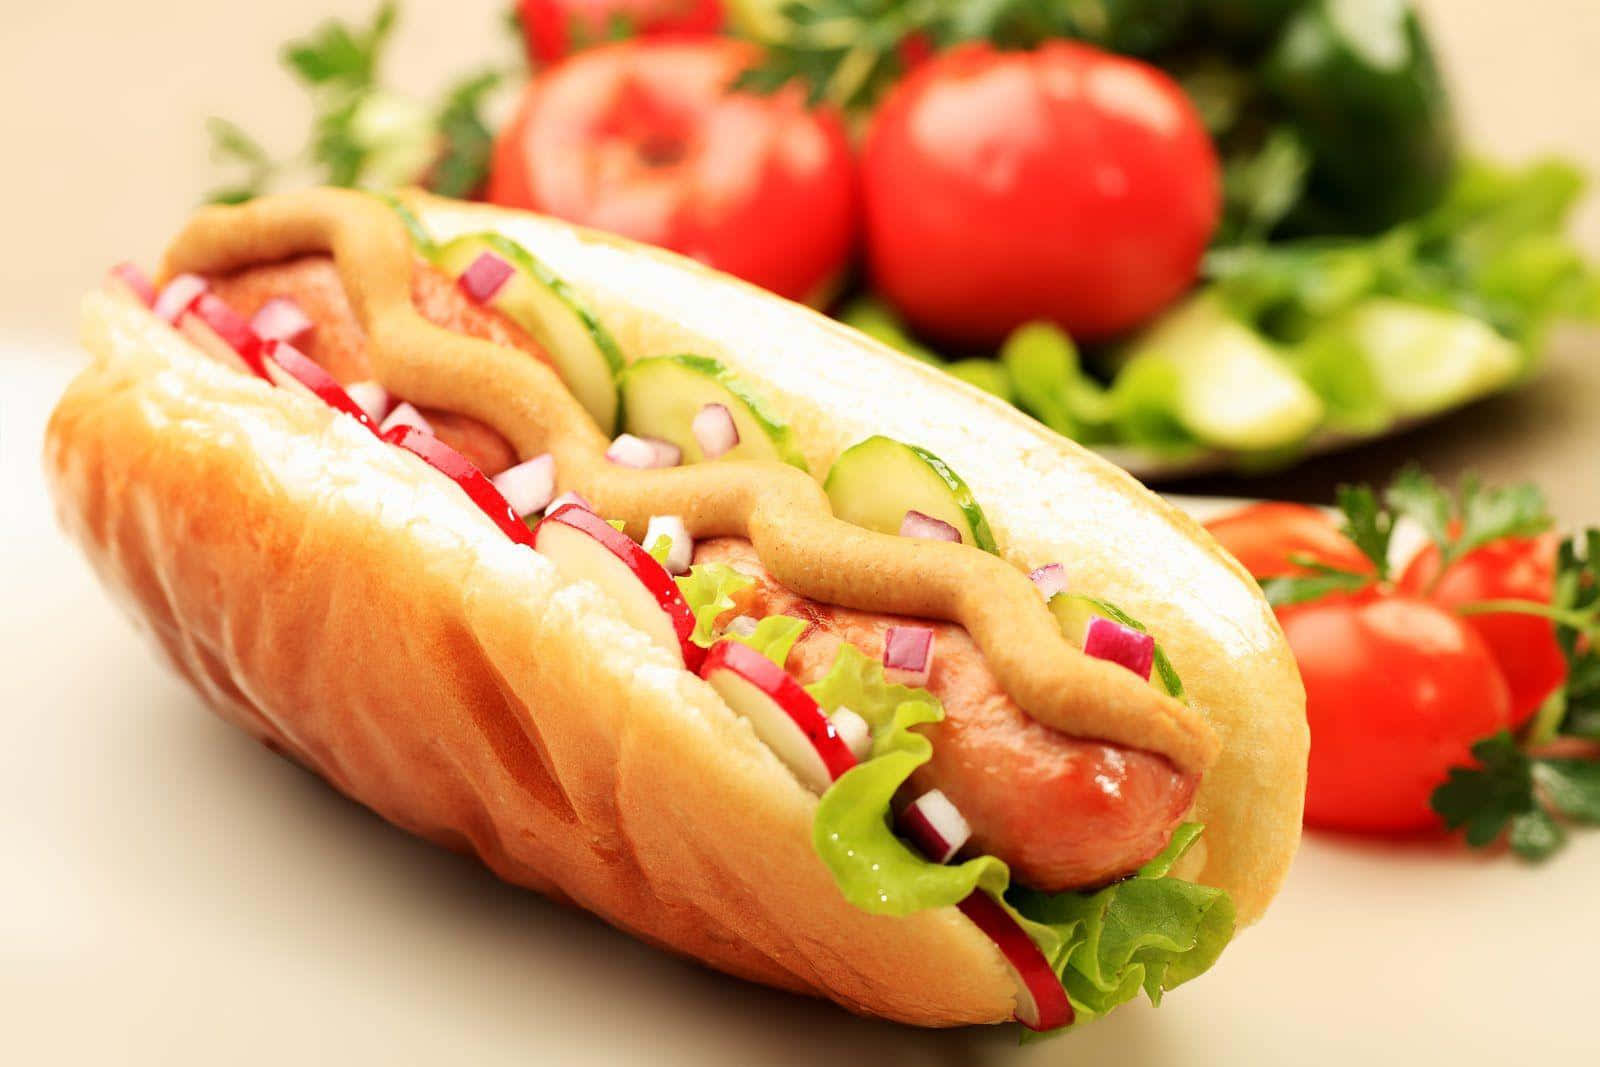 Take a Bite of this Juicy Hot Dog!